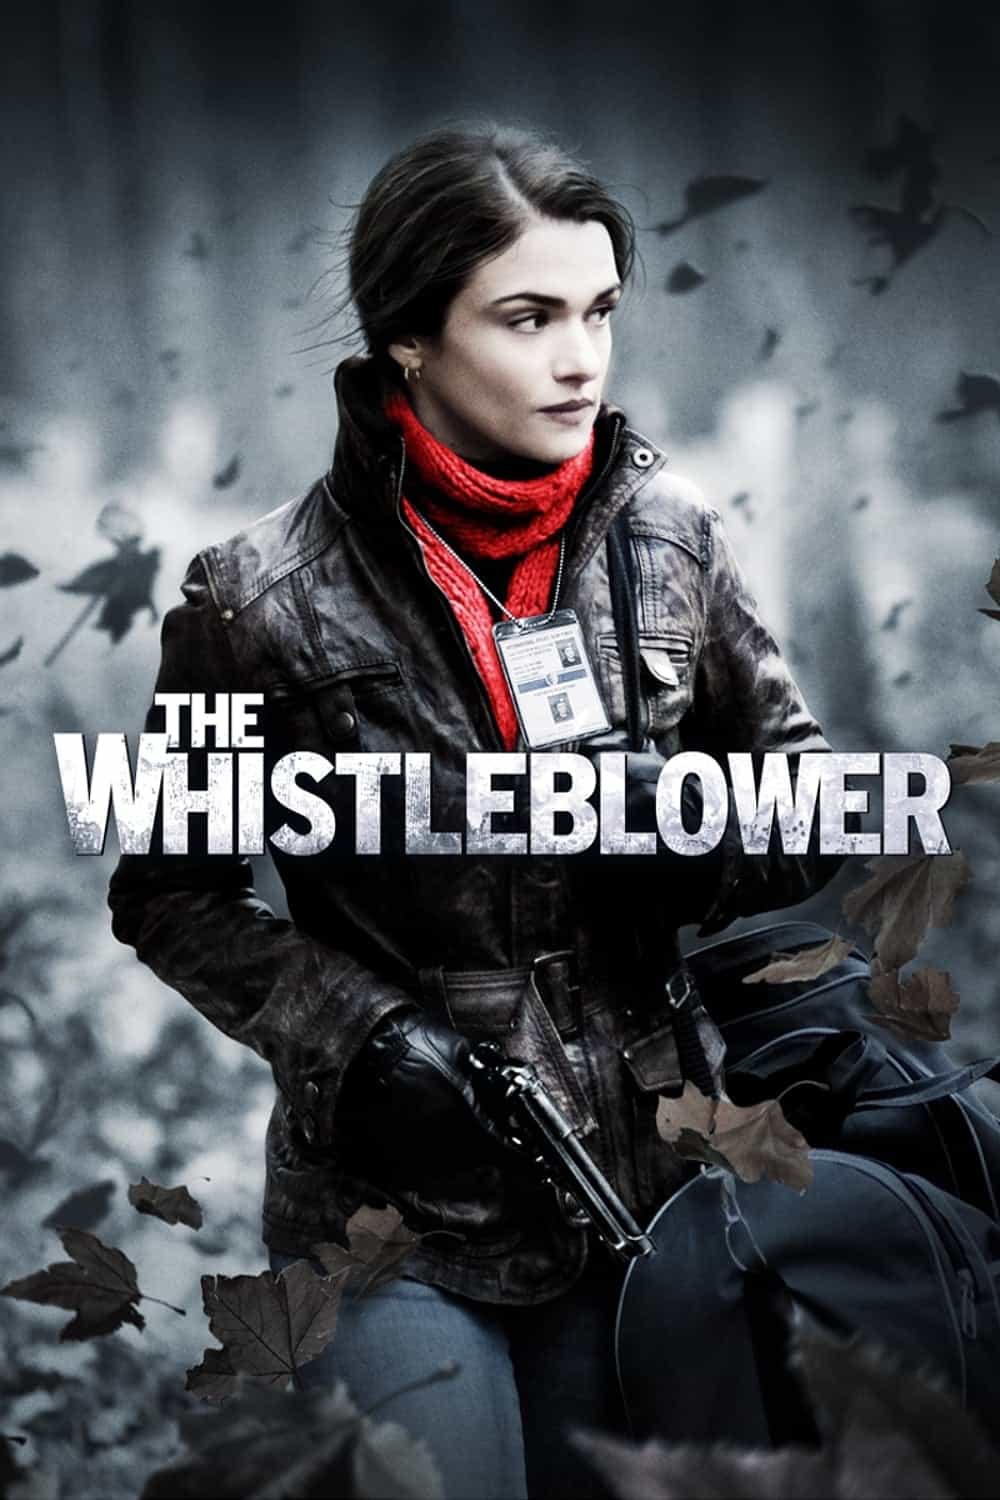 The Whistleblower 2011 Tamil Dubbed Biography Movie Online